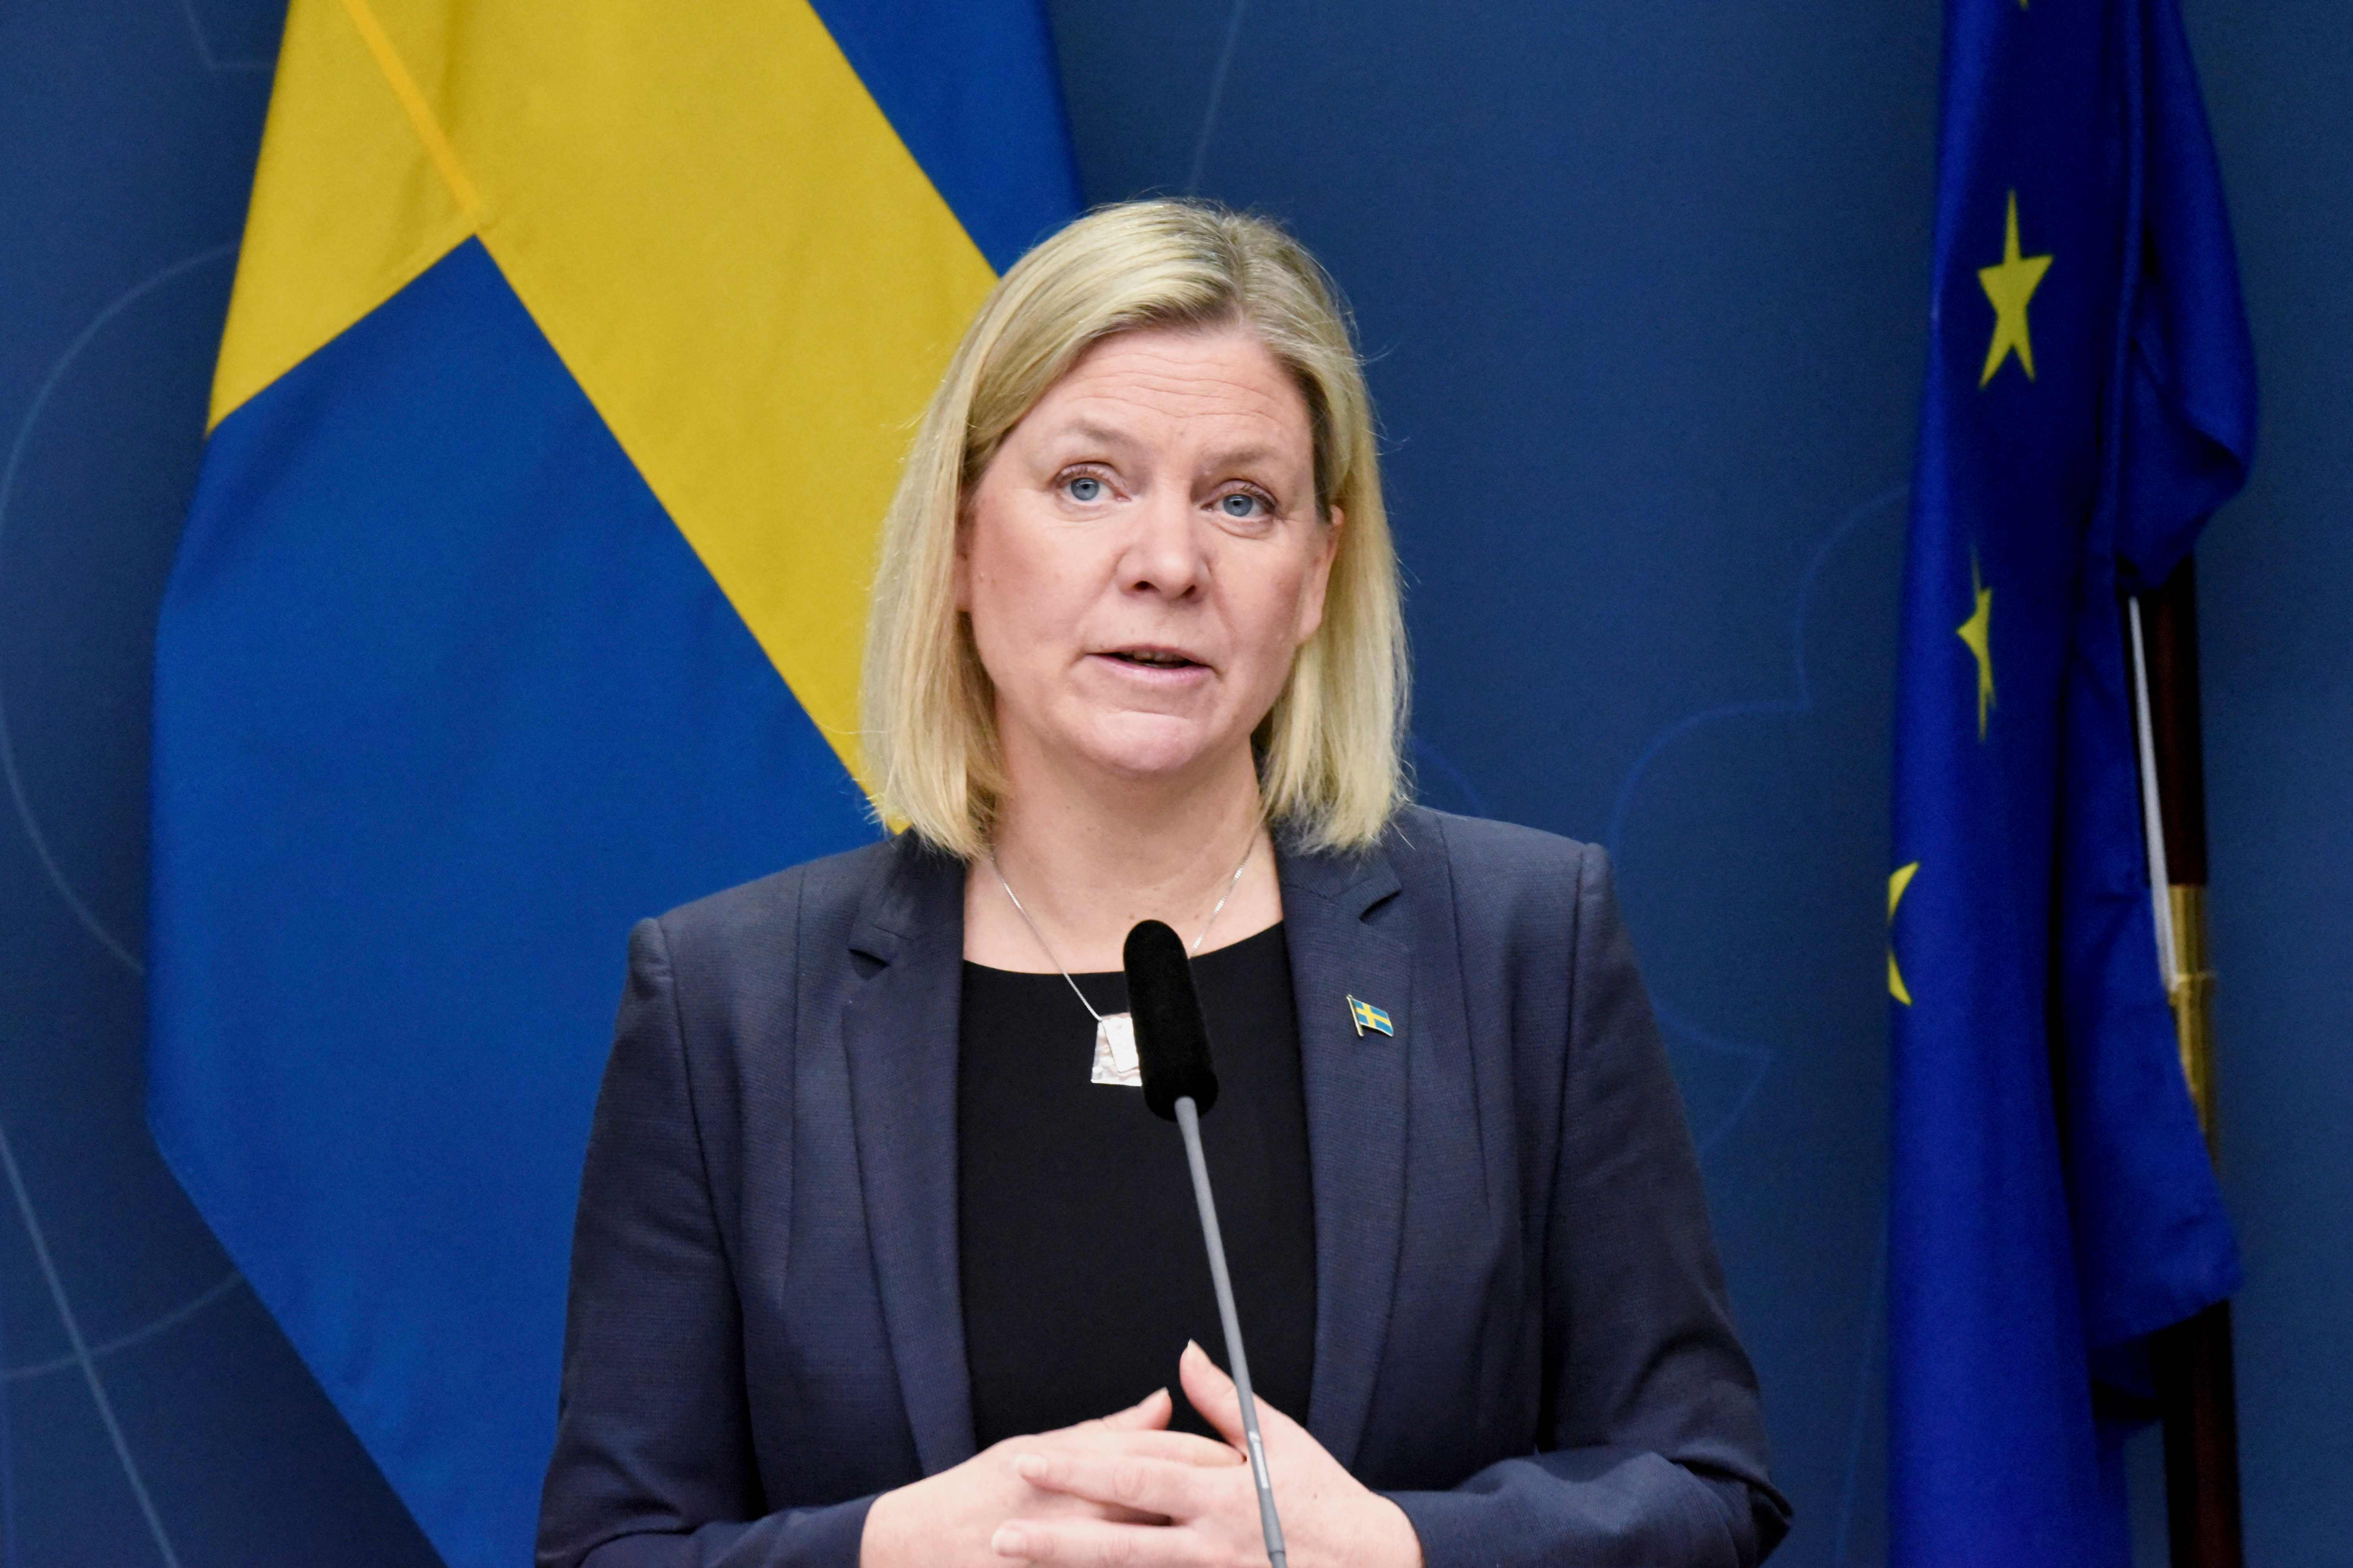 Sweden’s Prime Minister Magdalena Andersson speaks about new Covid restrictions during a press conference in Stockholm, 10 January 2022